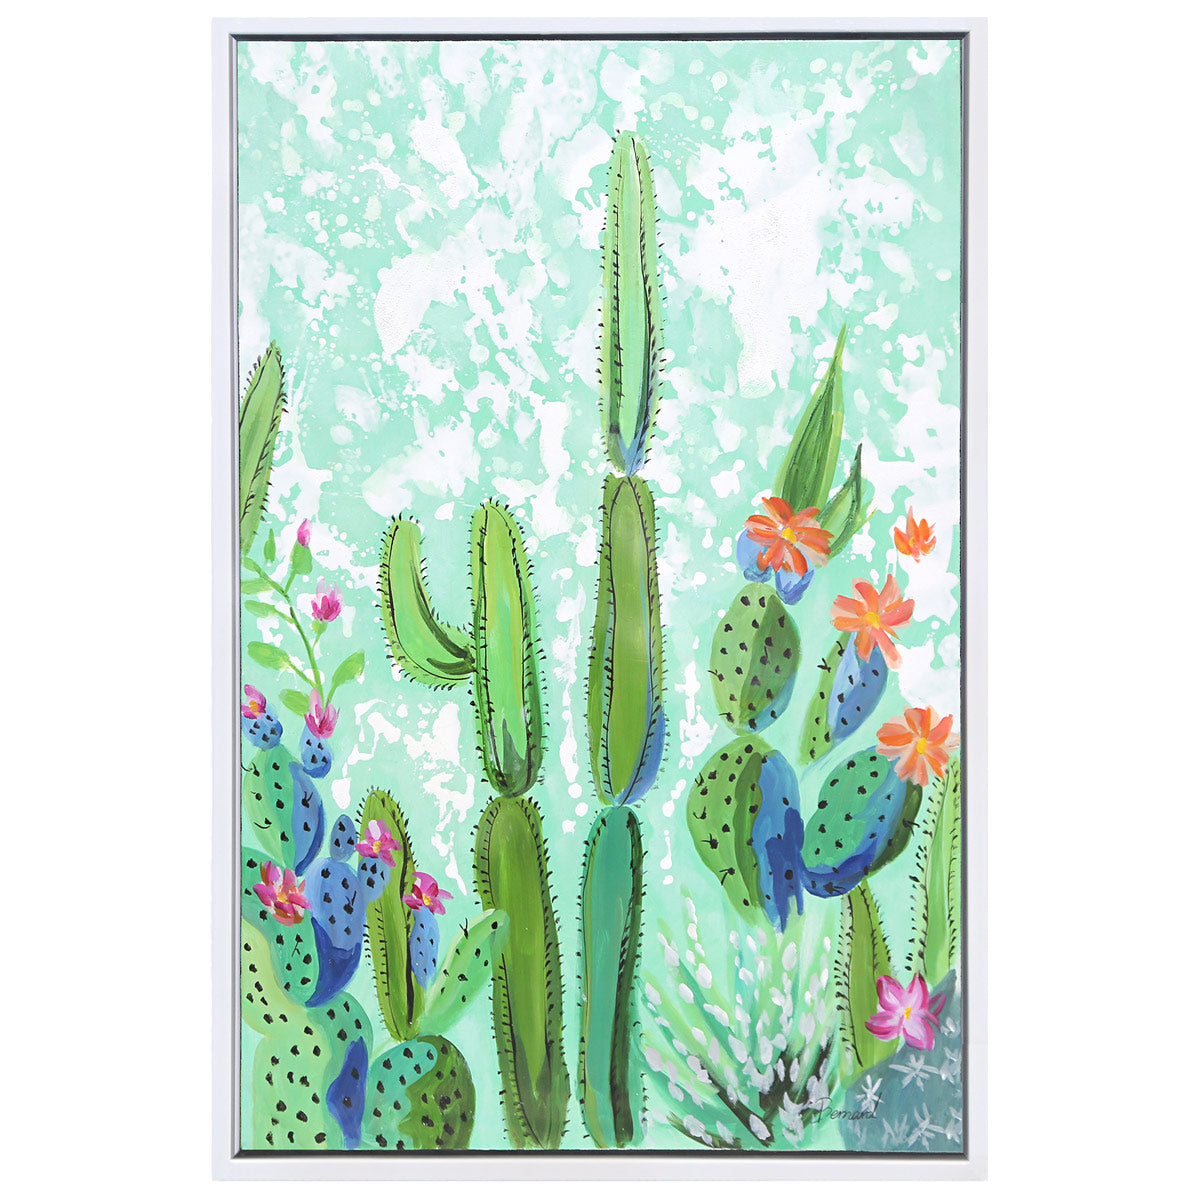 Framed painting of four cacti with cacti flowers on a blue-green watercolor style background.